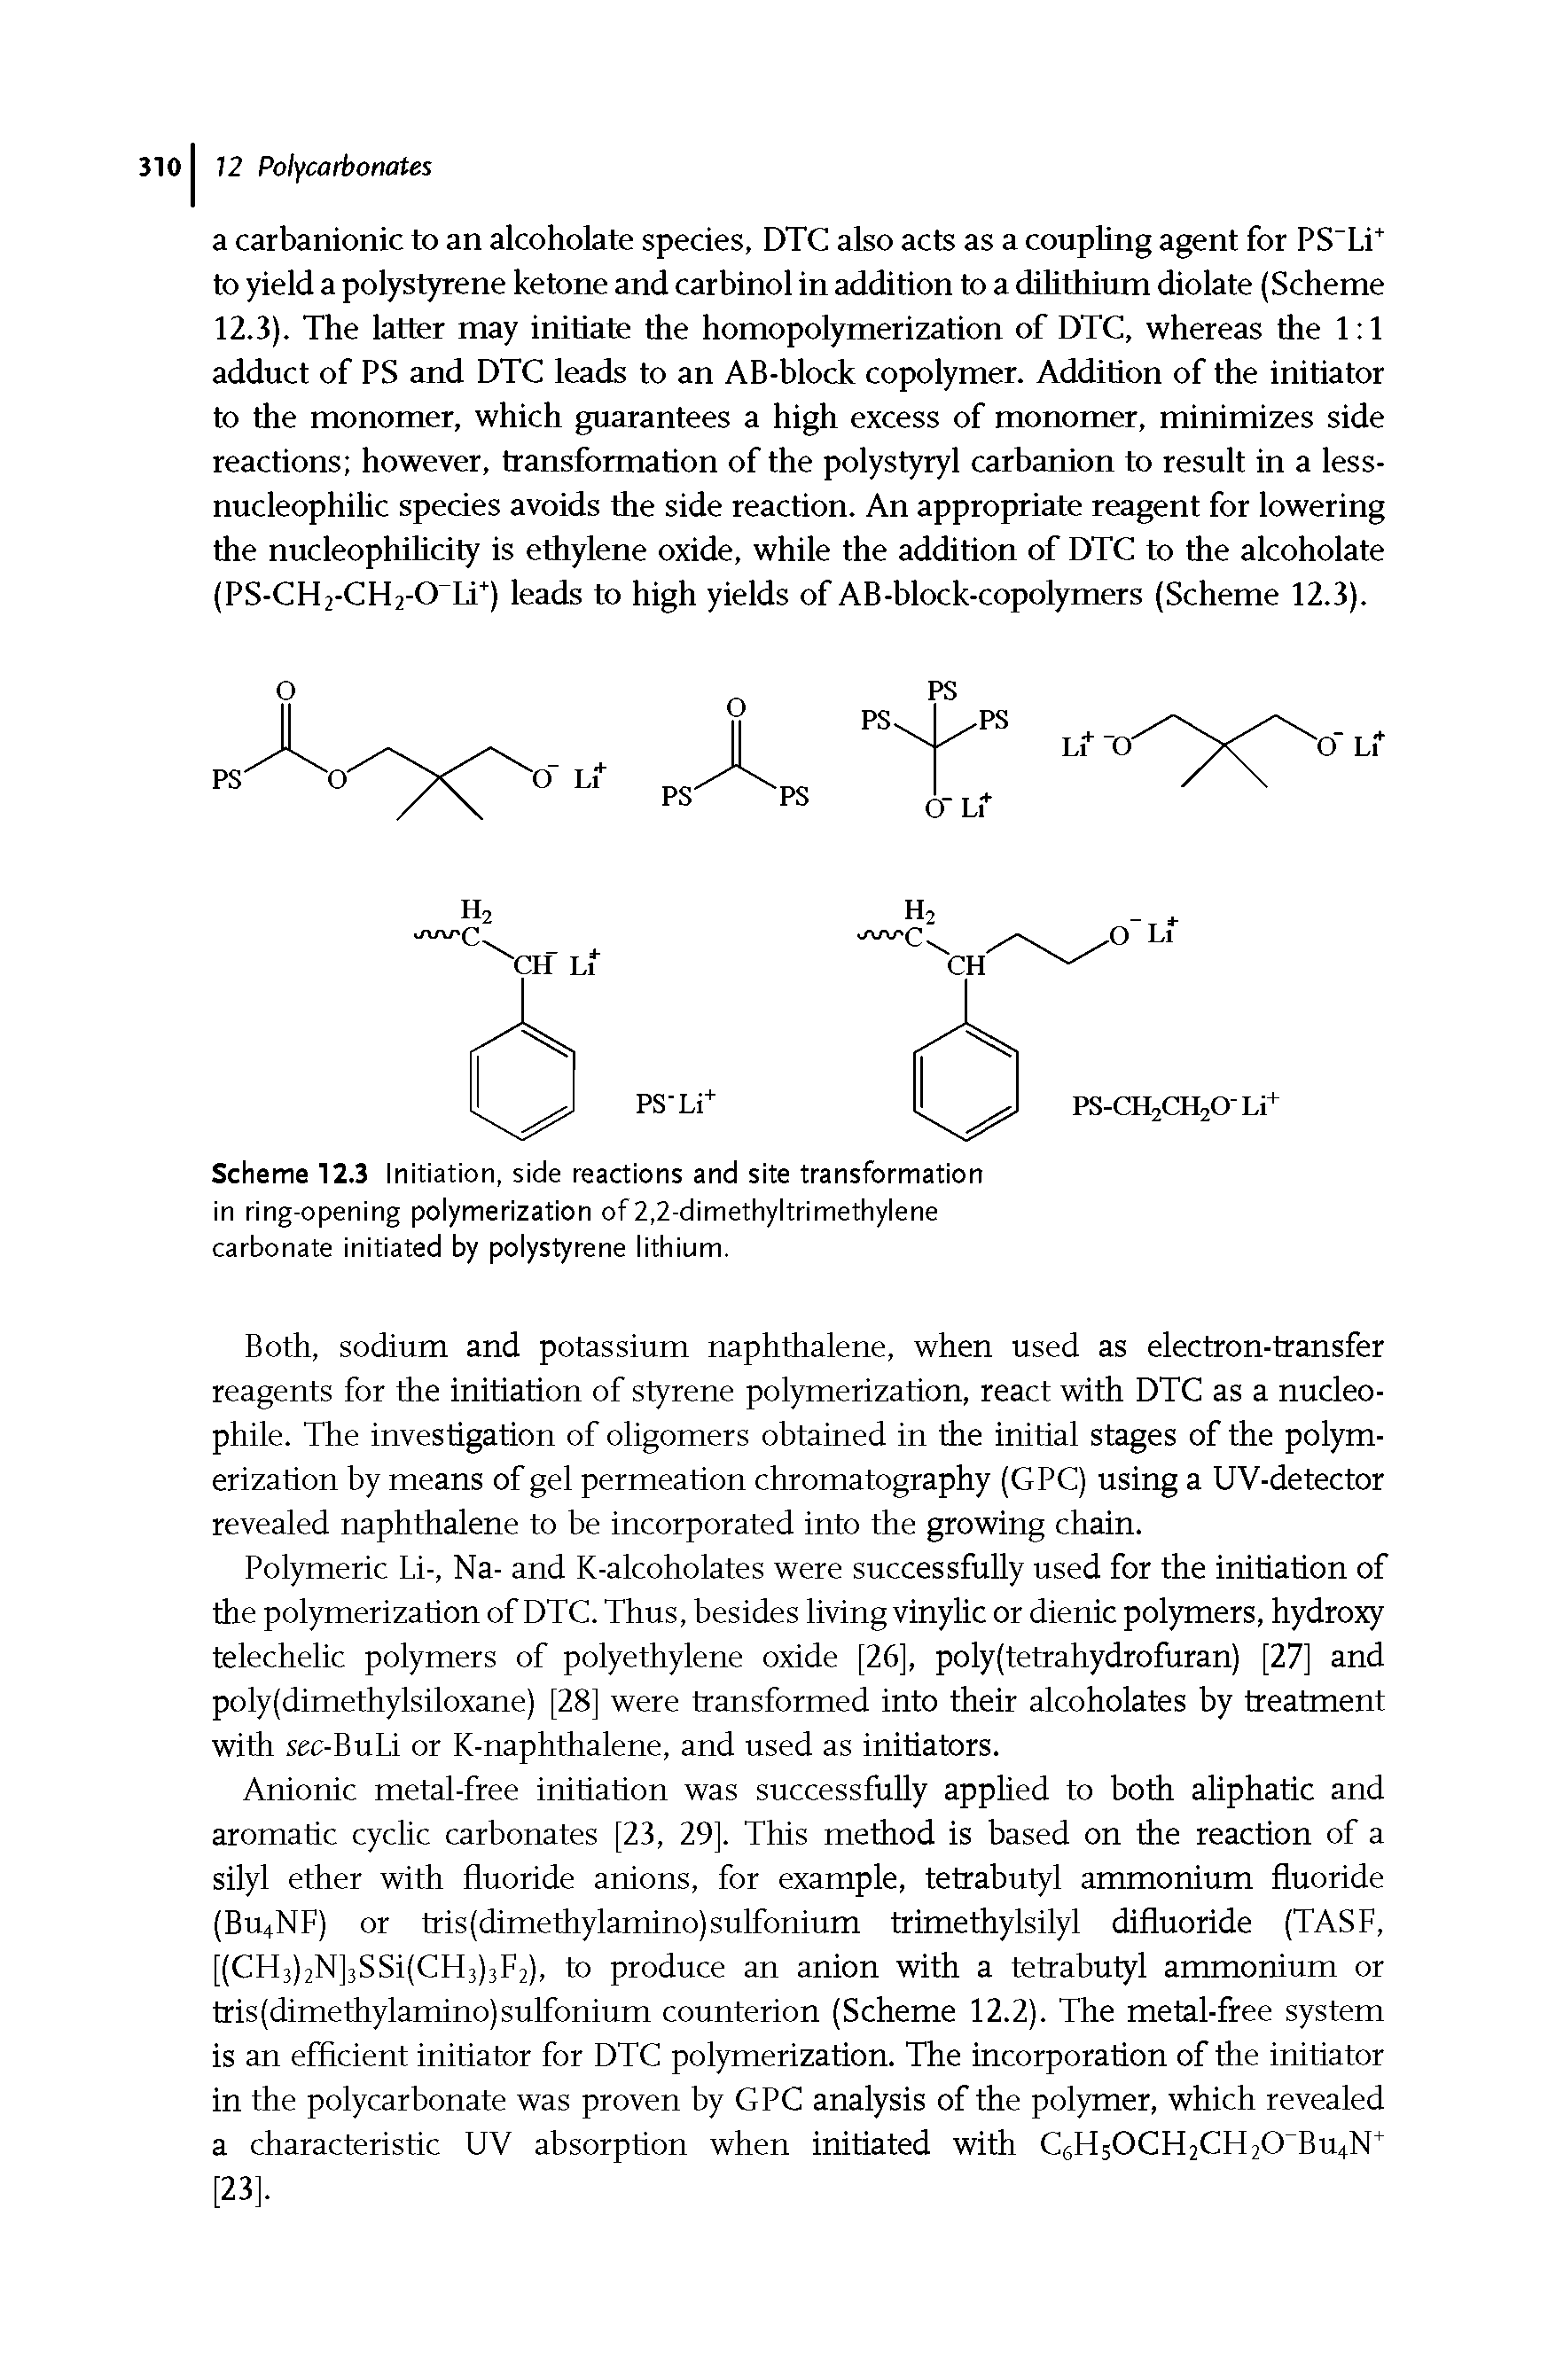 Scheme 12.3 Initiation, side reactions and site transformation in ring-opening polymerization of 2,2-dimethyltrimethylene carbonate initiated by polystyrene lithium.